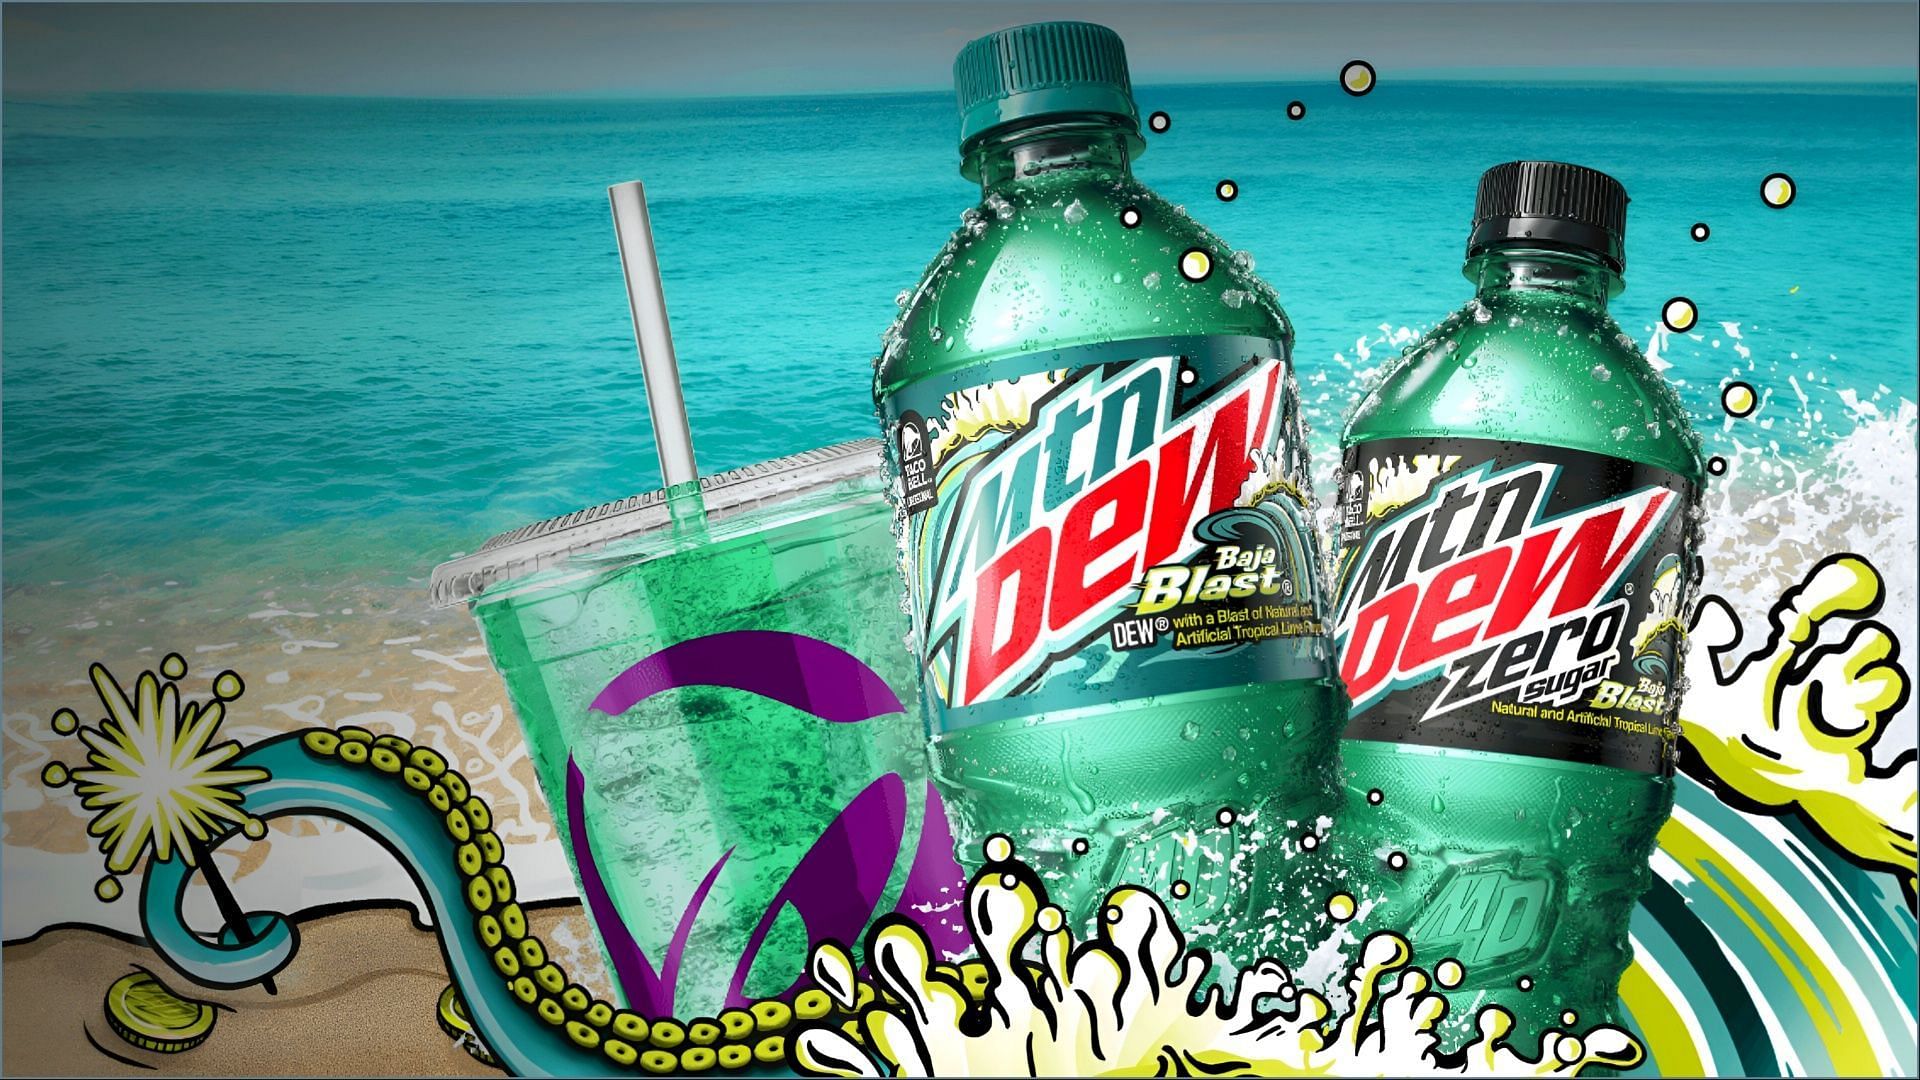 Which actors from Parks & Recreation are featured in the Mountain Dew